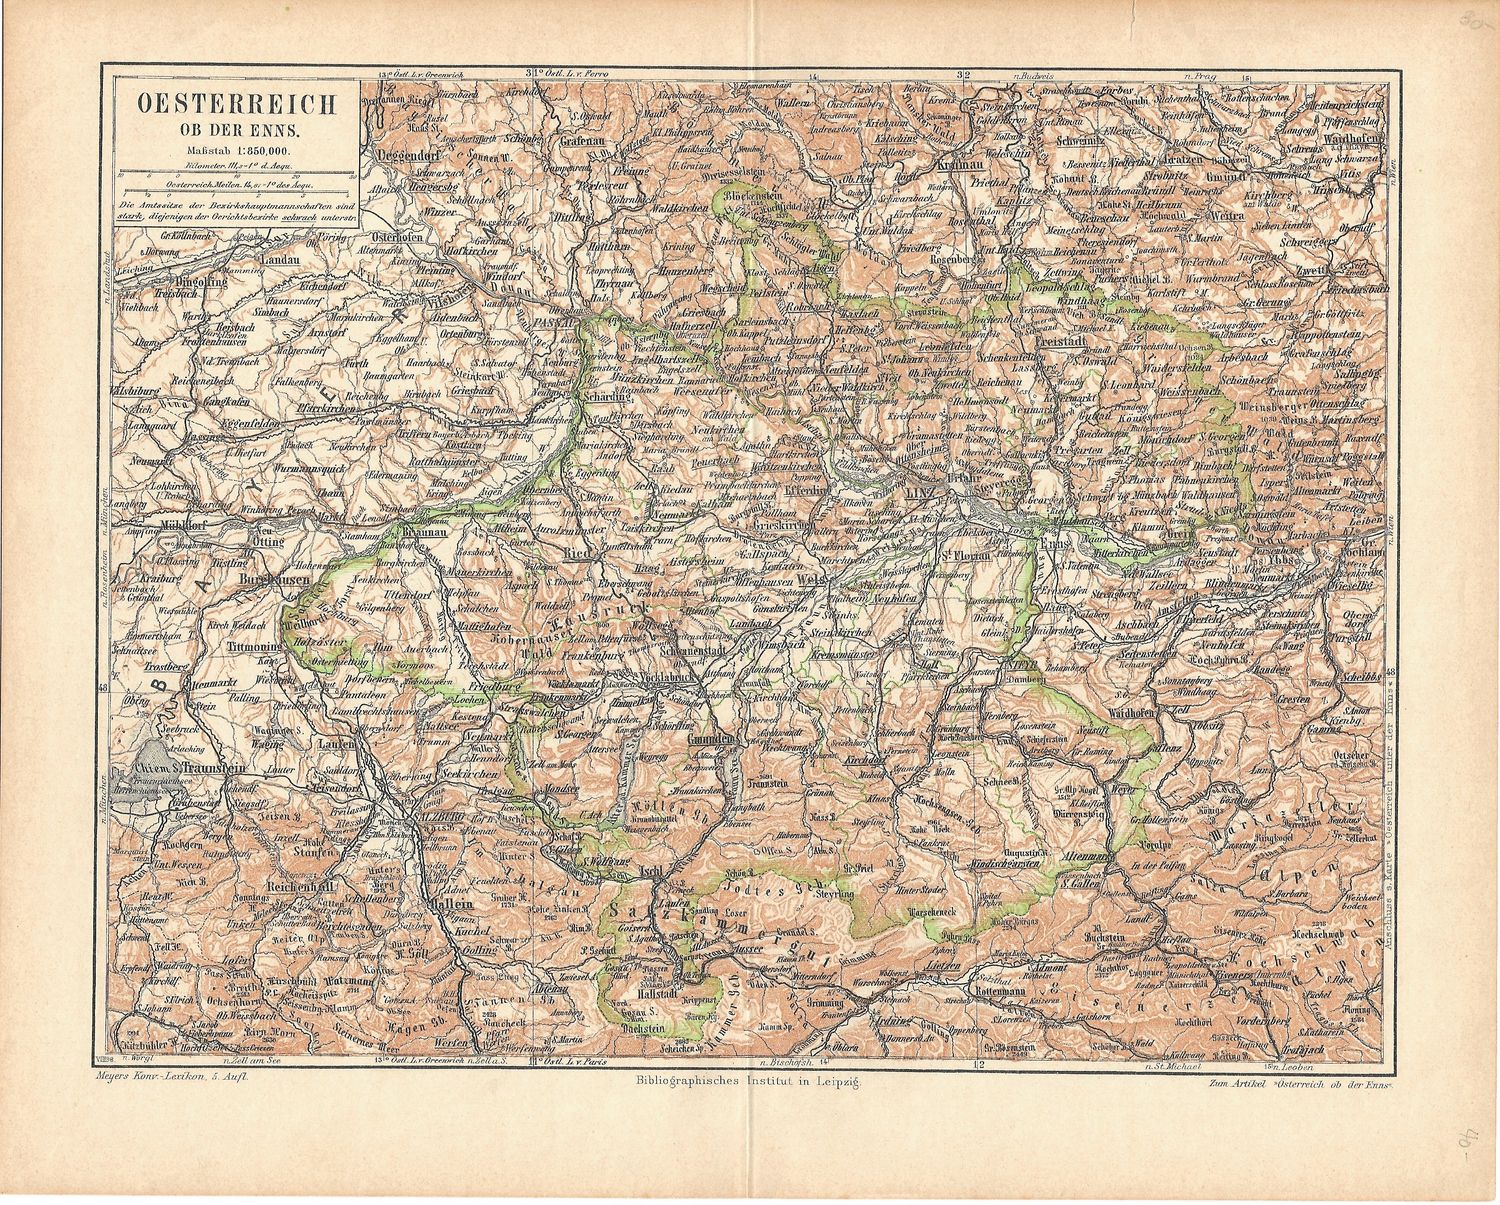 1907 Map of Austria by Meyers in German